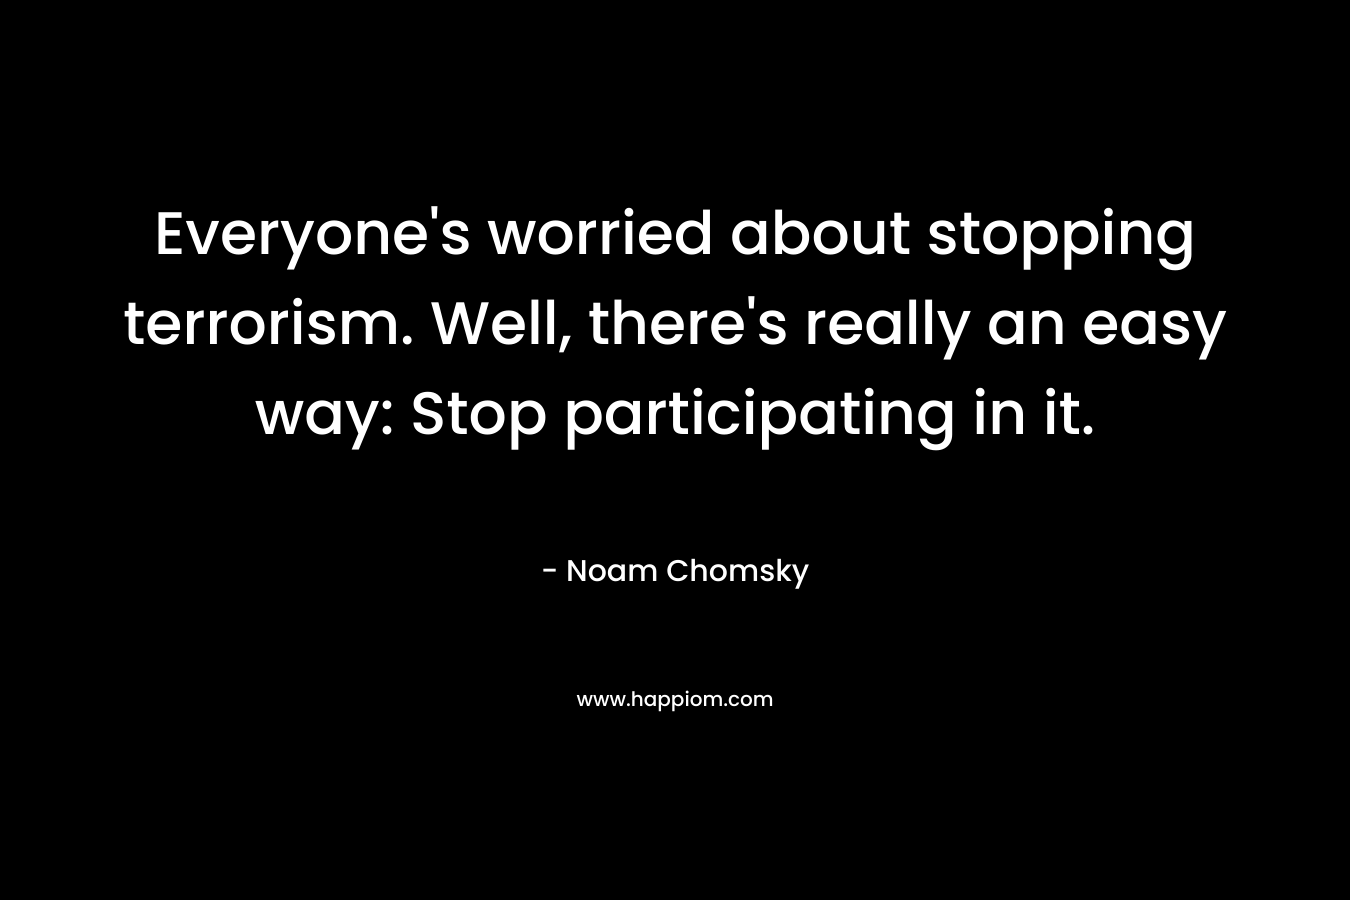 Everyone’s worried about stopping terrorism. Well, there’s really an easy way: Stop participating in it. – Noam Chomsky